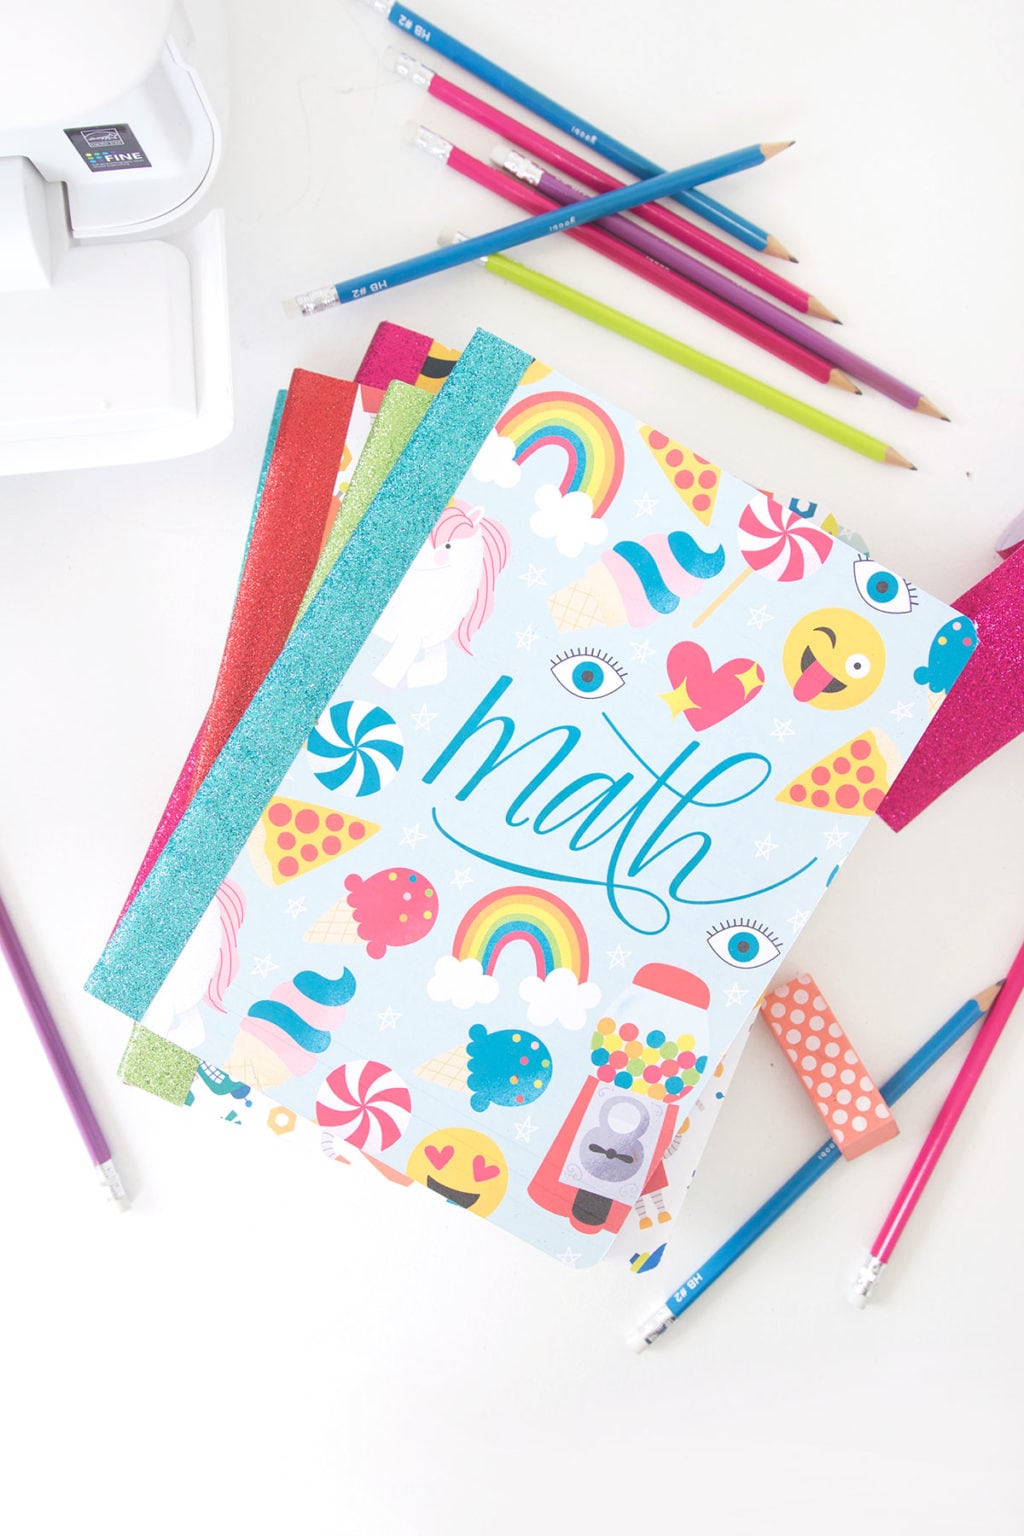 These printable composition notebook covers are perfect for school-age kids and grown ups too! If you love colorful designs, these are for you! 